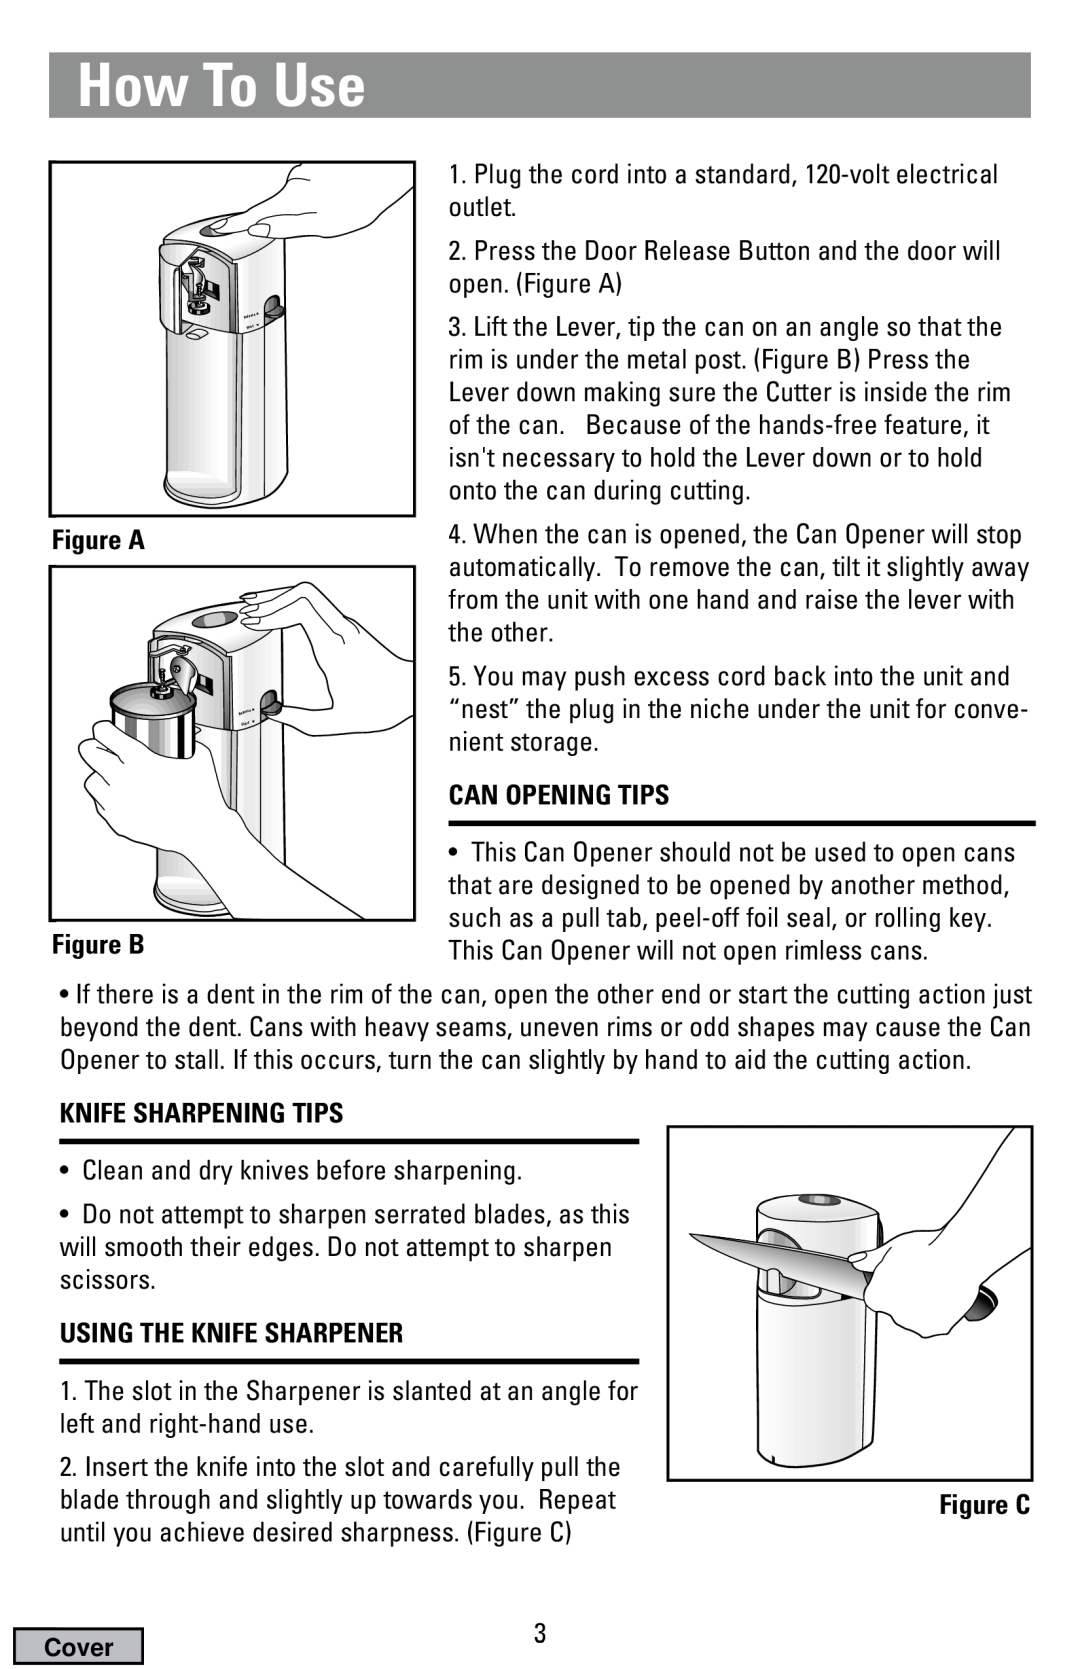 Black & Decker EC500B How To Use, Figure A, Figure B, Can Opening Tips, Knife Sharpening Tips, Using The Knife Sharpener 